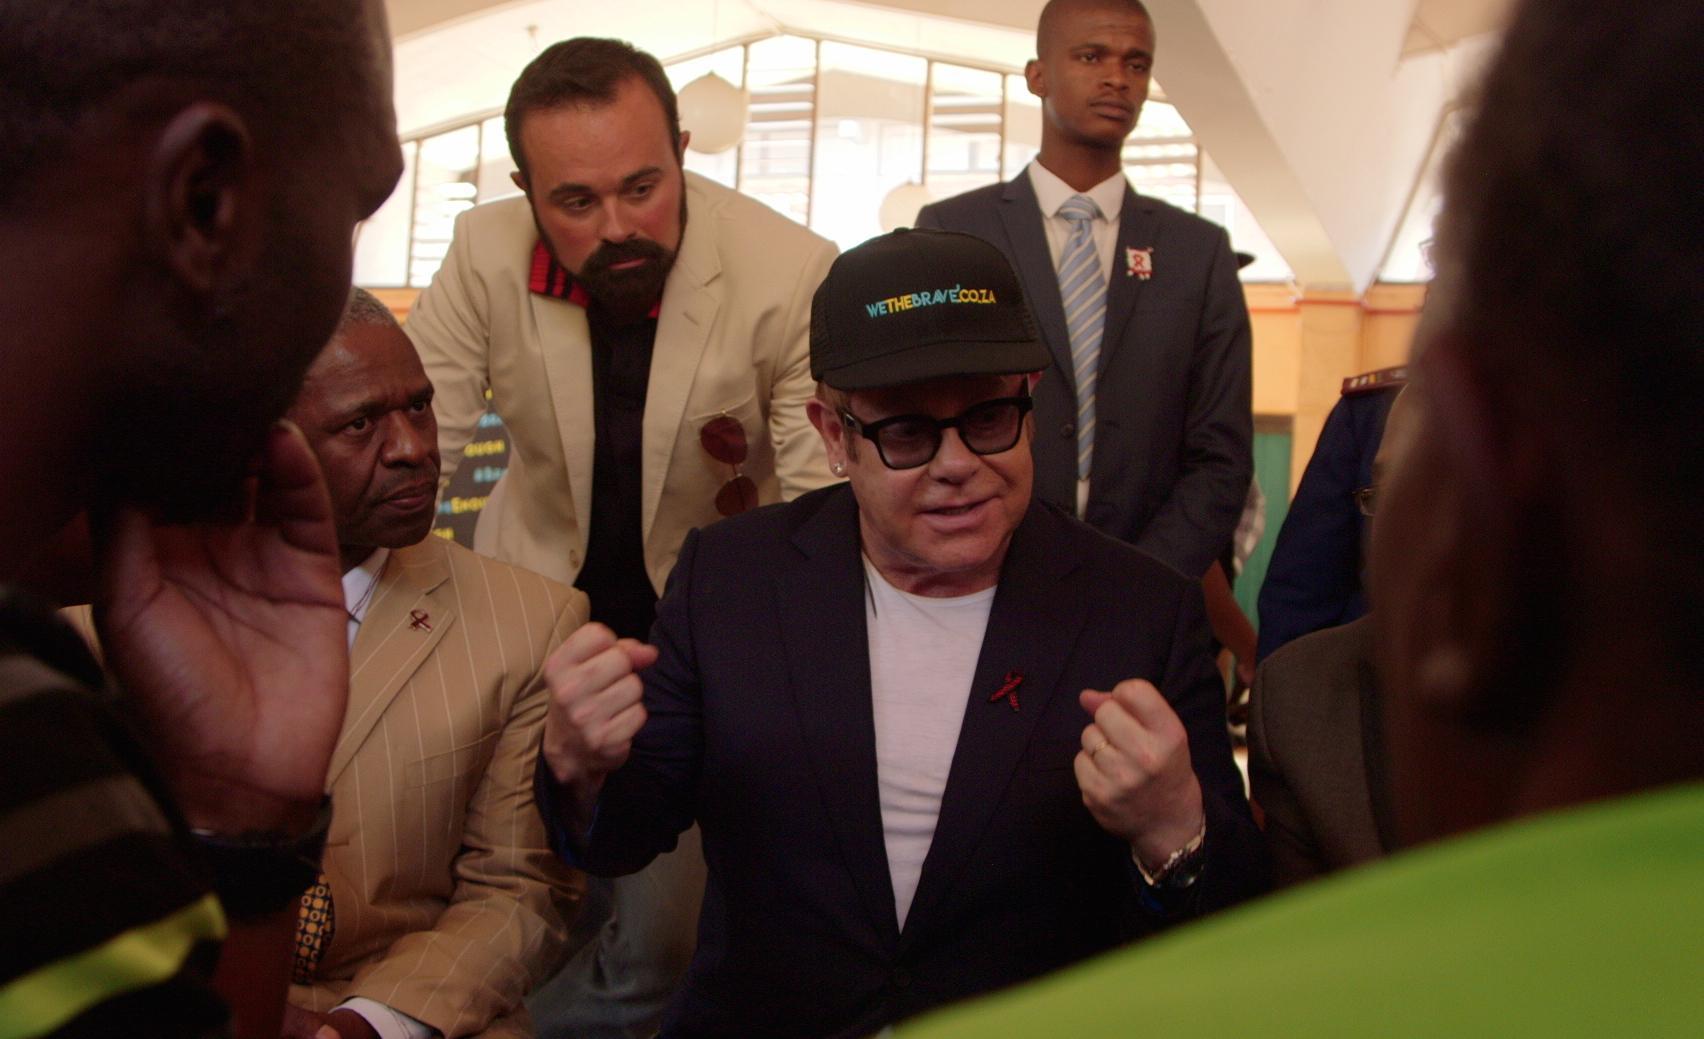 Sir Elton John and Evgeny Lebedev visit the Gateway clinic in Umlazi, which is backed by the singer’s charitable foundation